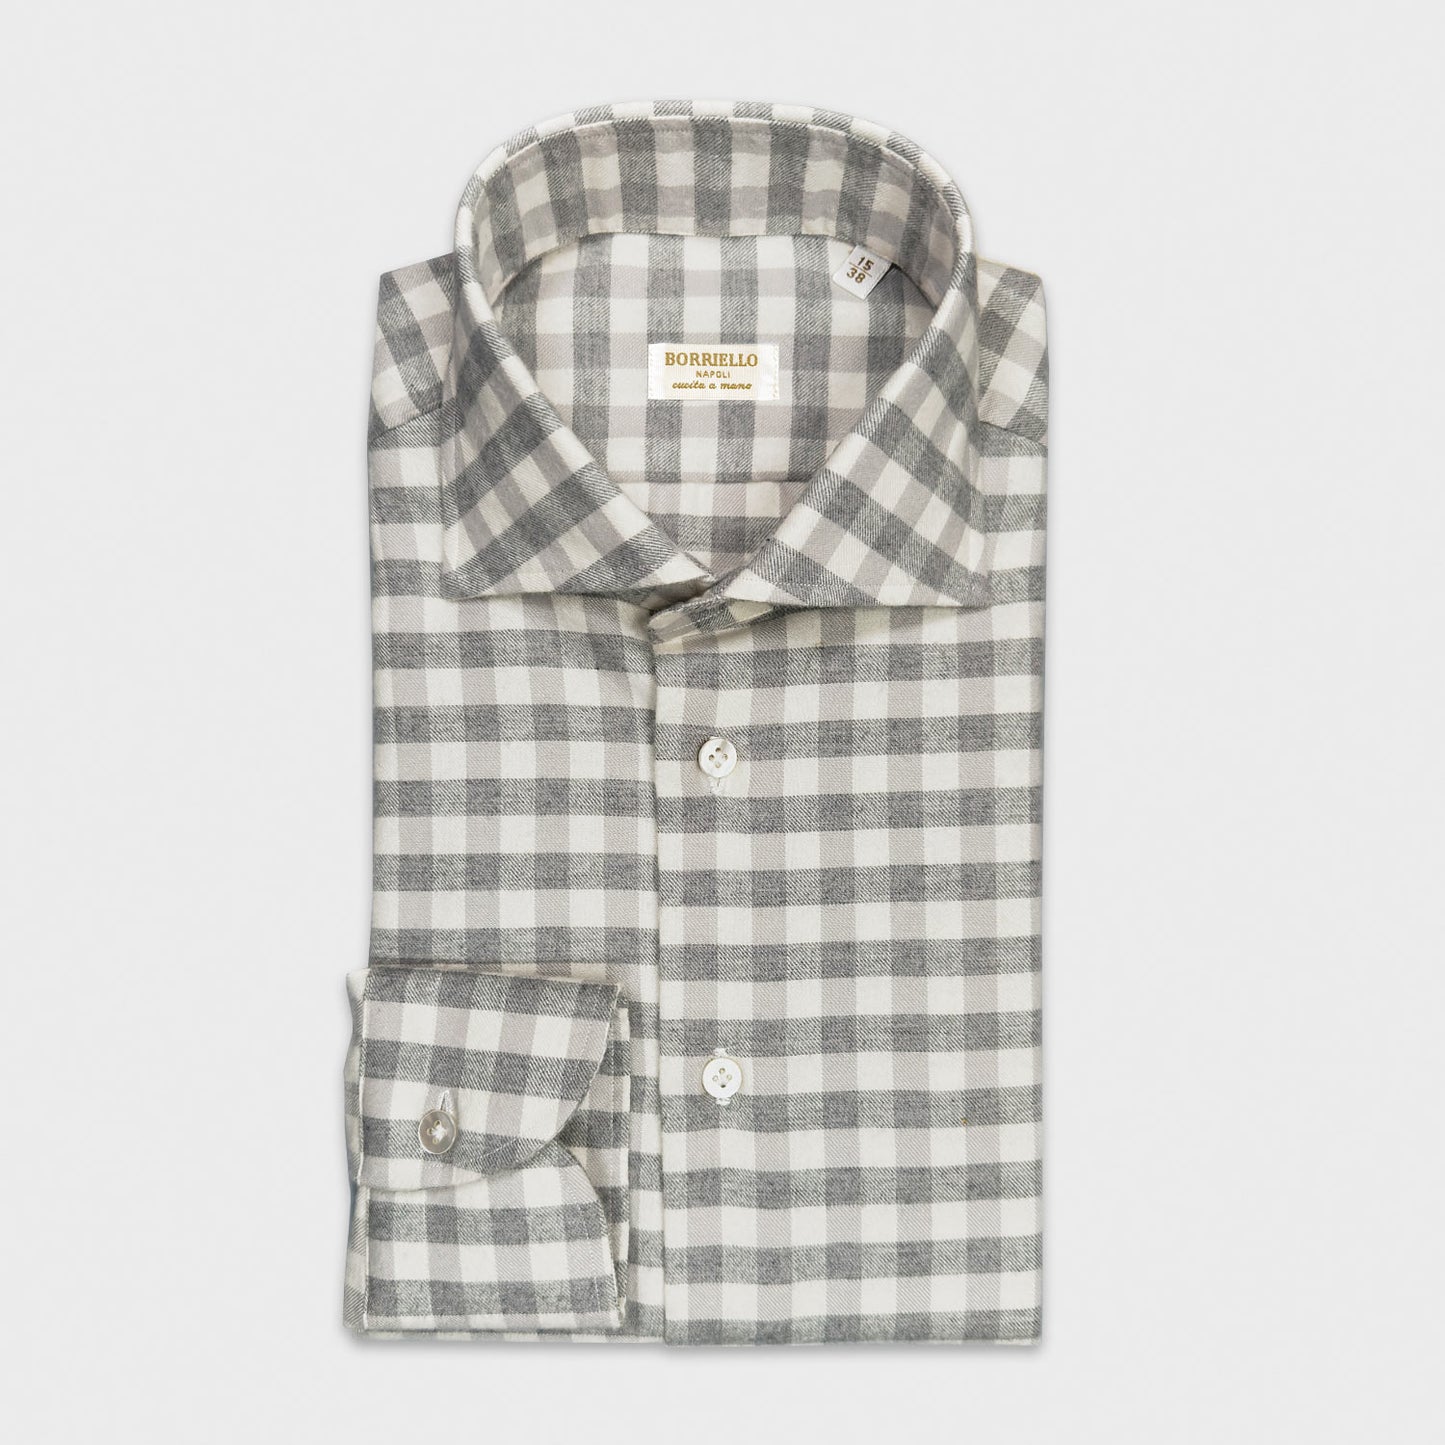 Greige Cotton Flannel Checked Shirt Borriello Napoli. Classic checked shirt made with a finest and soft Italian flannel cotton, soft finish and silky touch, comfortable to wear in the middle seasons and in winter in your classic or sporty outfit.